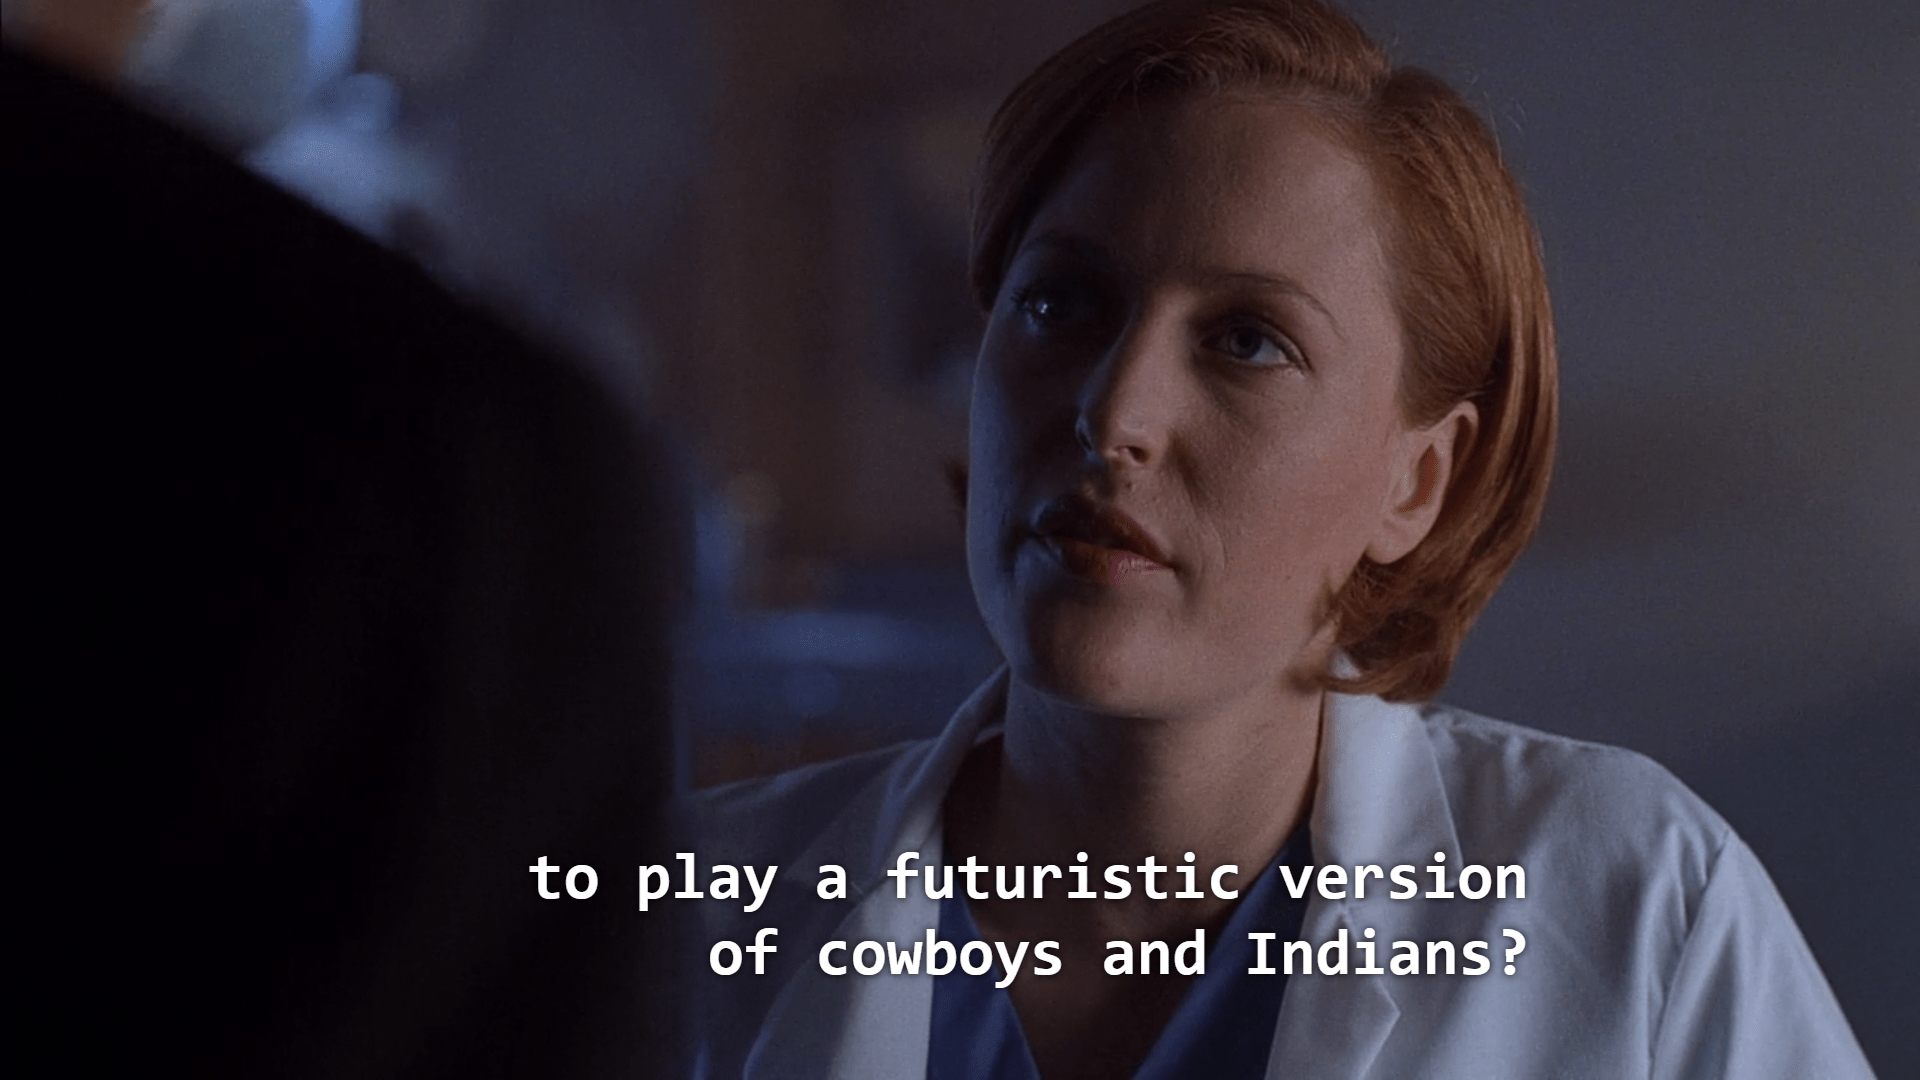 Top 5 Lines From The X-Files Video Game Episode